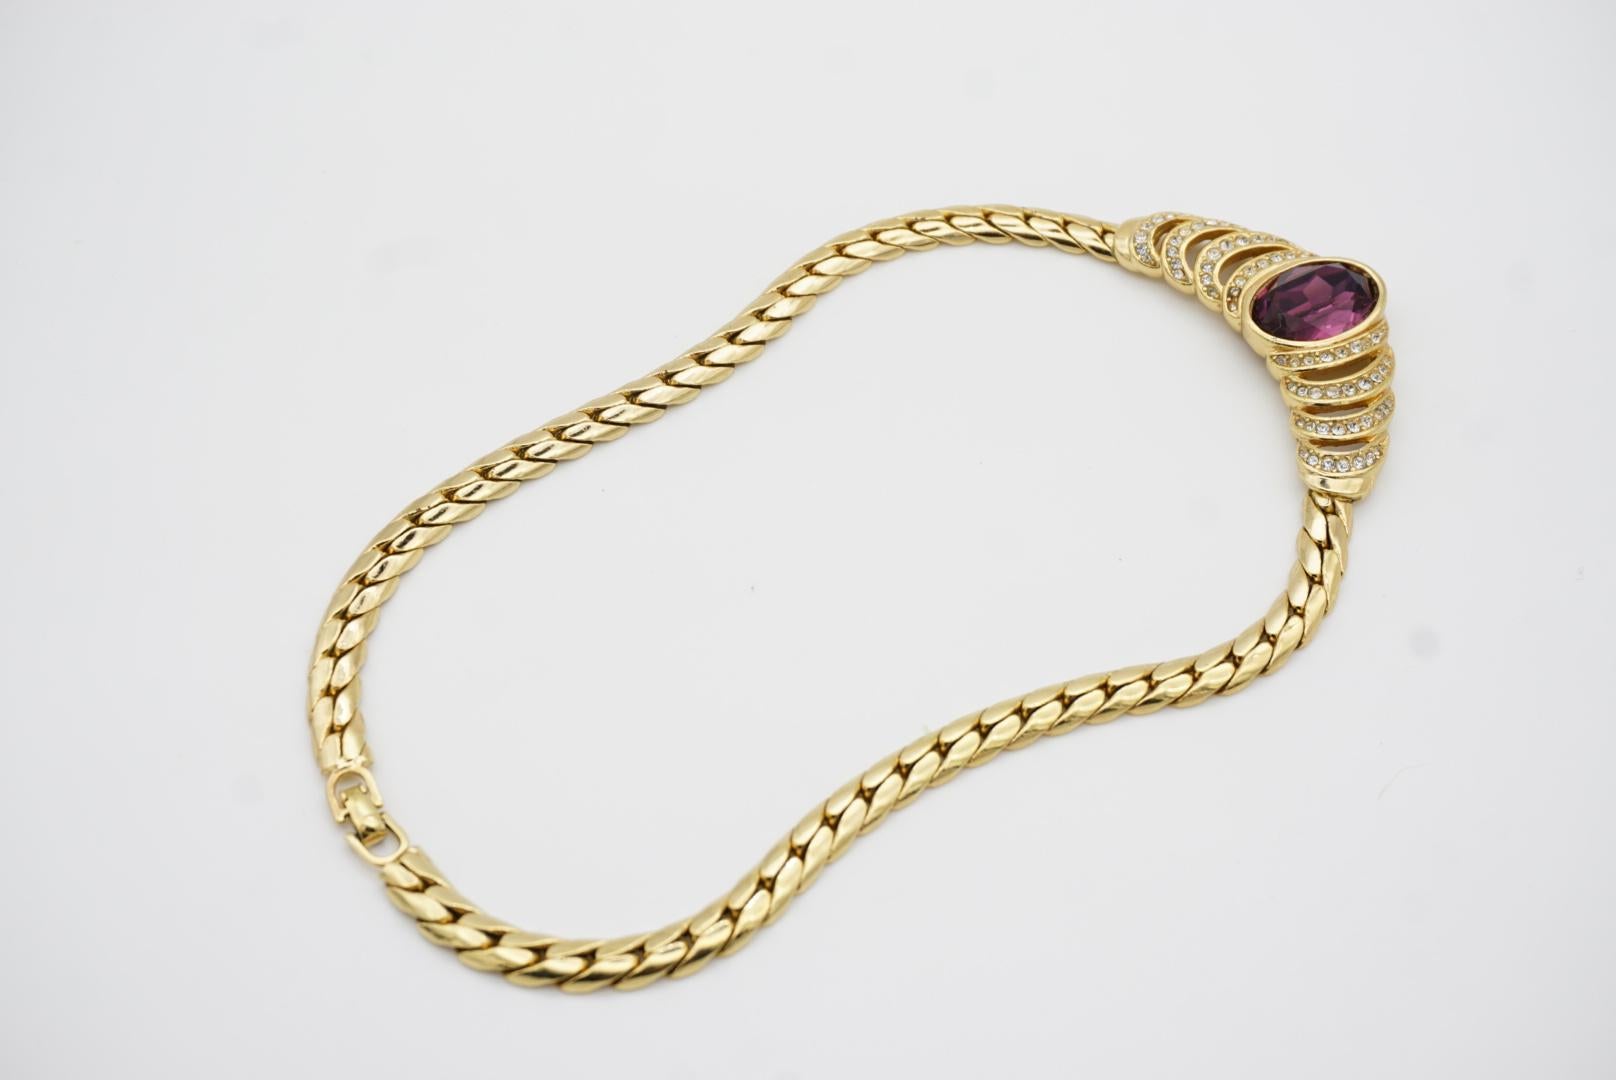 Christian Dior Vintage 1980s Large Oval Amethyst Crystals Gold Openwork Necklace For Sale 7